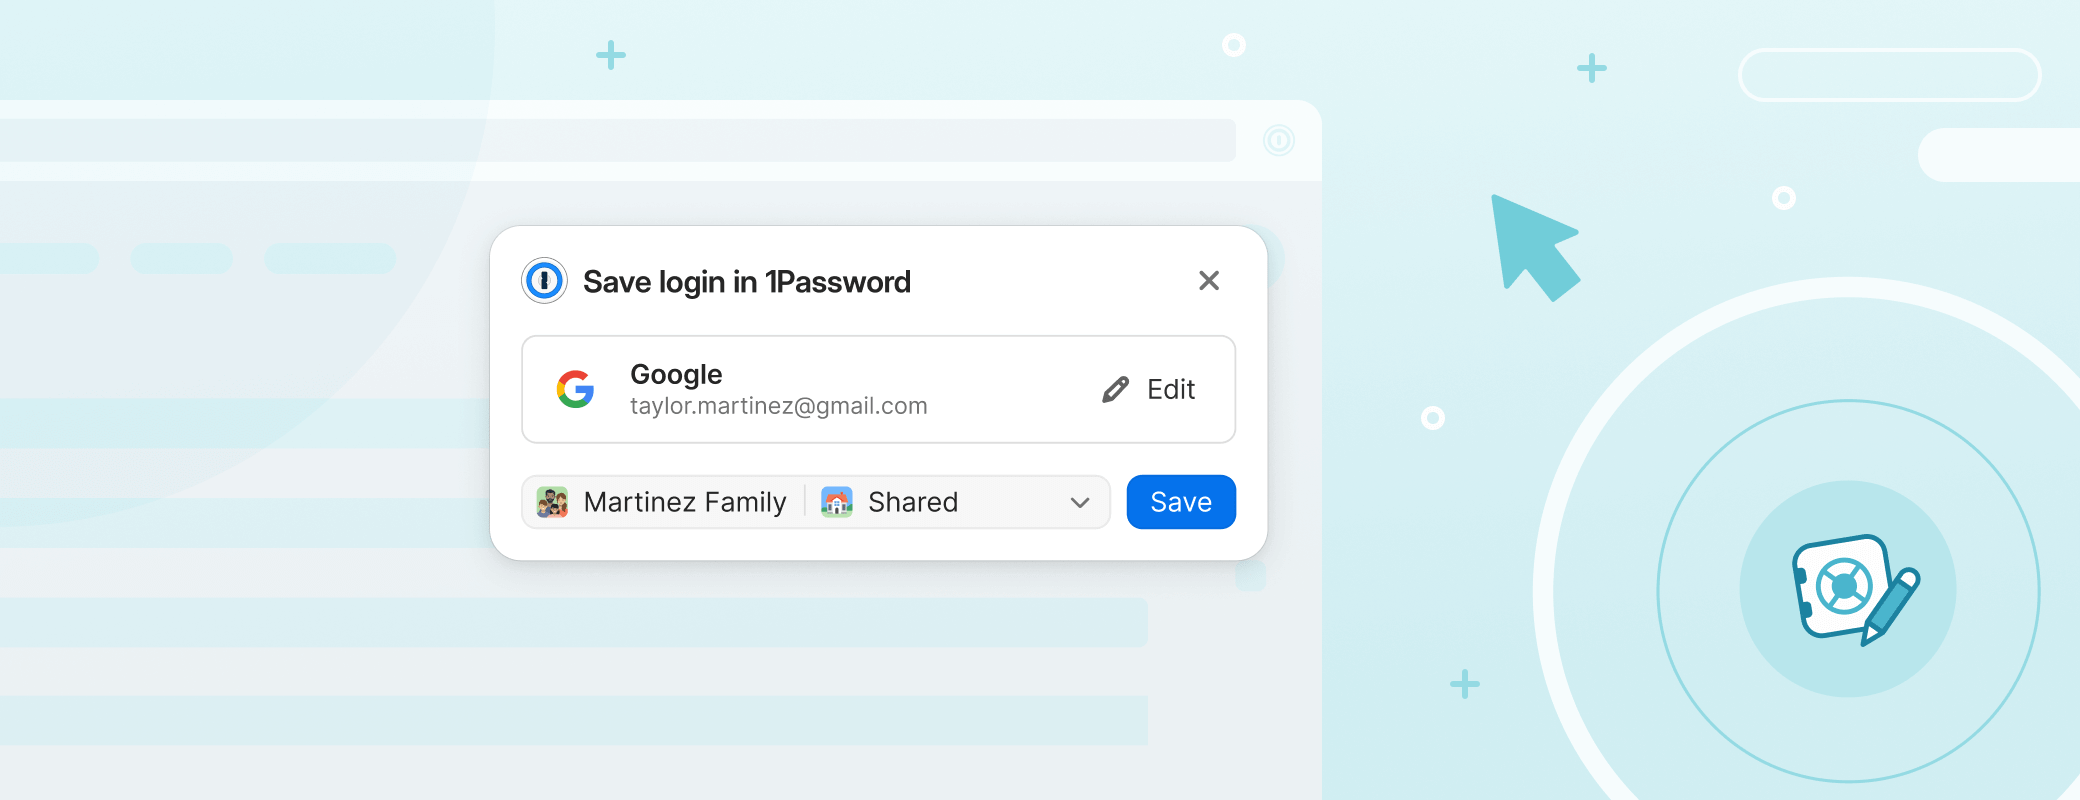 1Password product enhancements [Summer edition]: Recovery codes, auto-save, and more